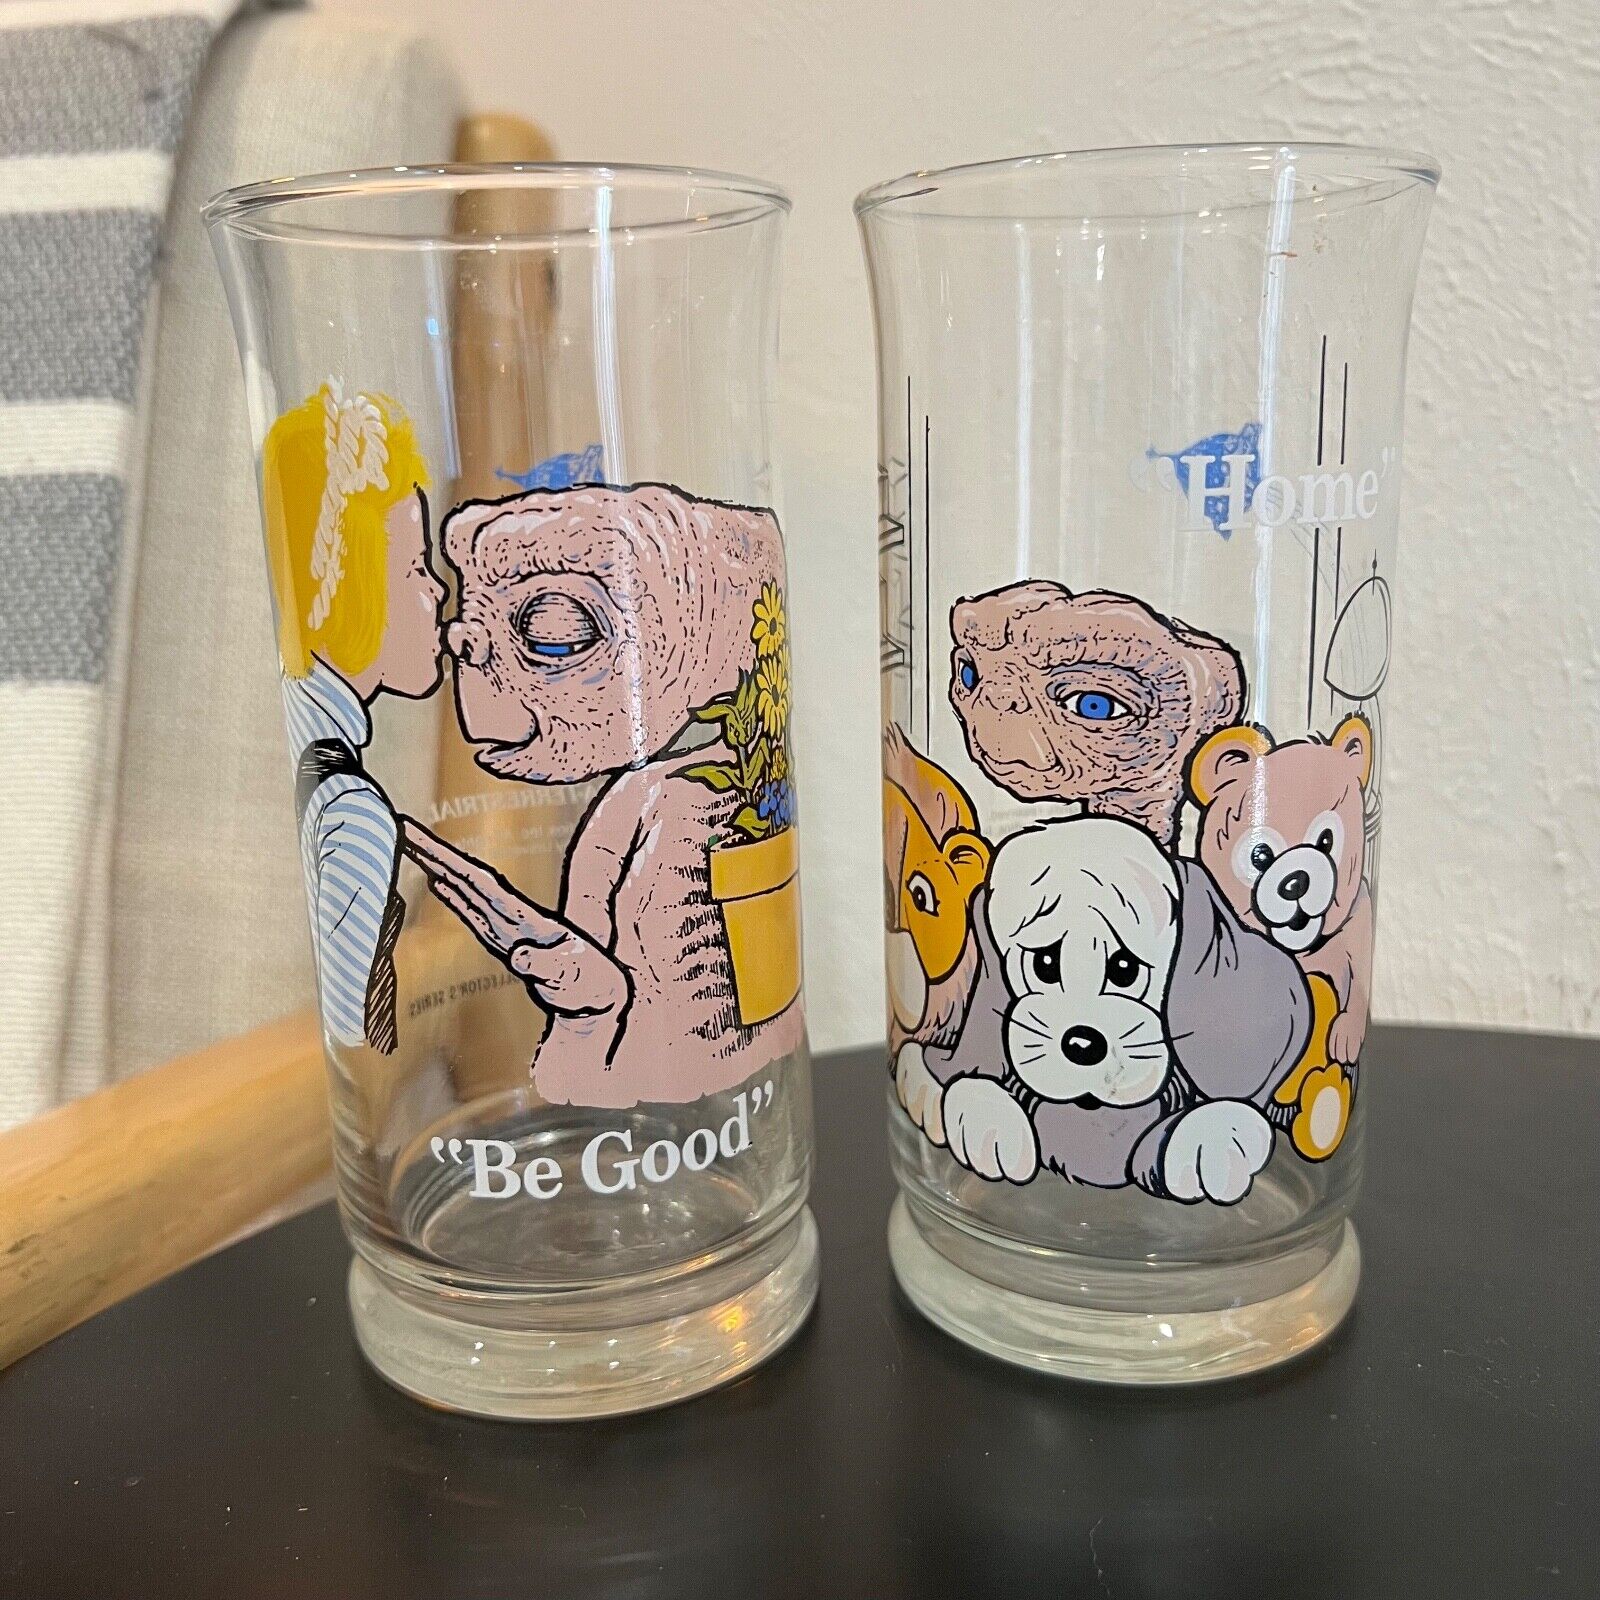 E.T. The Extra Terrestrial -  Vintage Glass Cup Pizza Hut E.T Cups